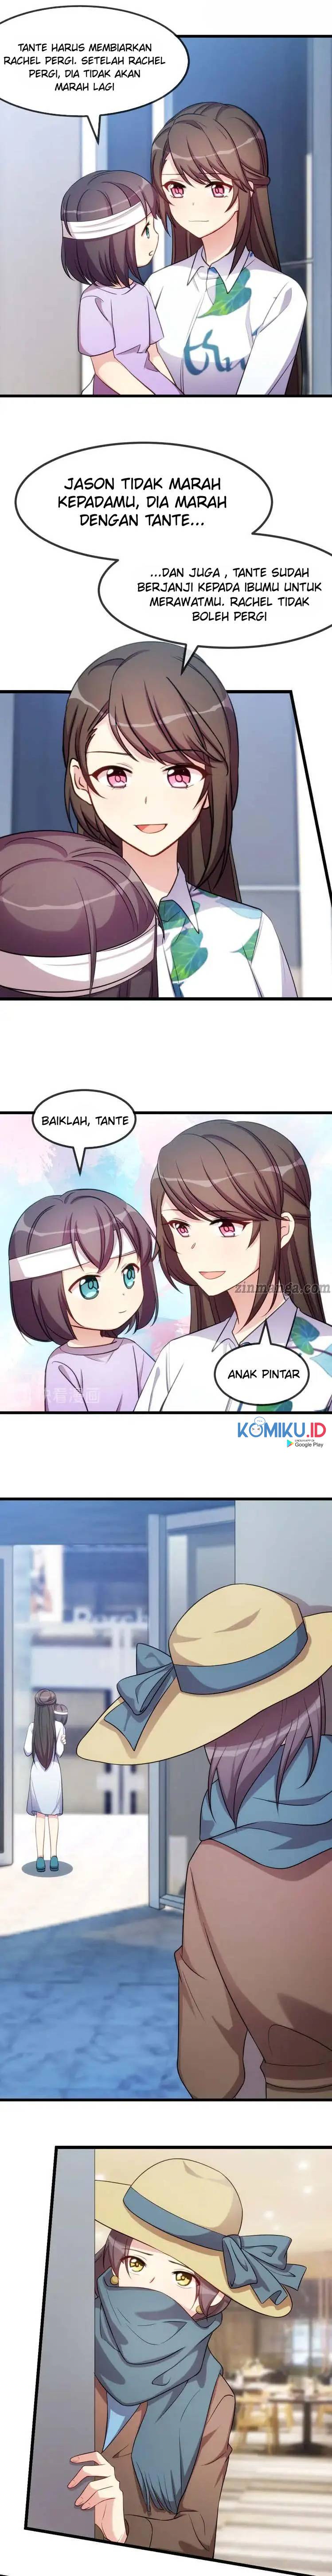 CEO’s Sudden Proposal Chapter 253 7